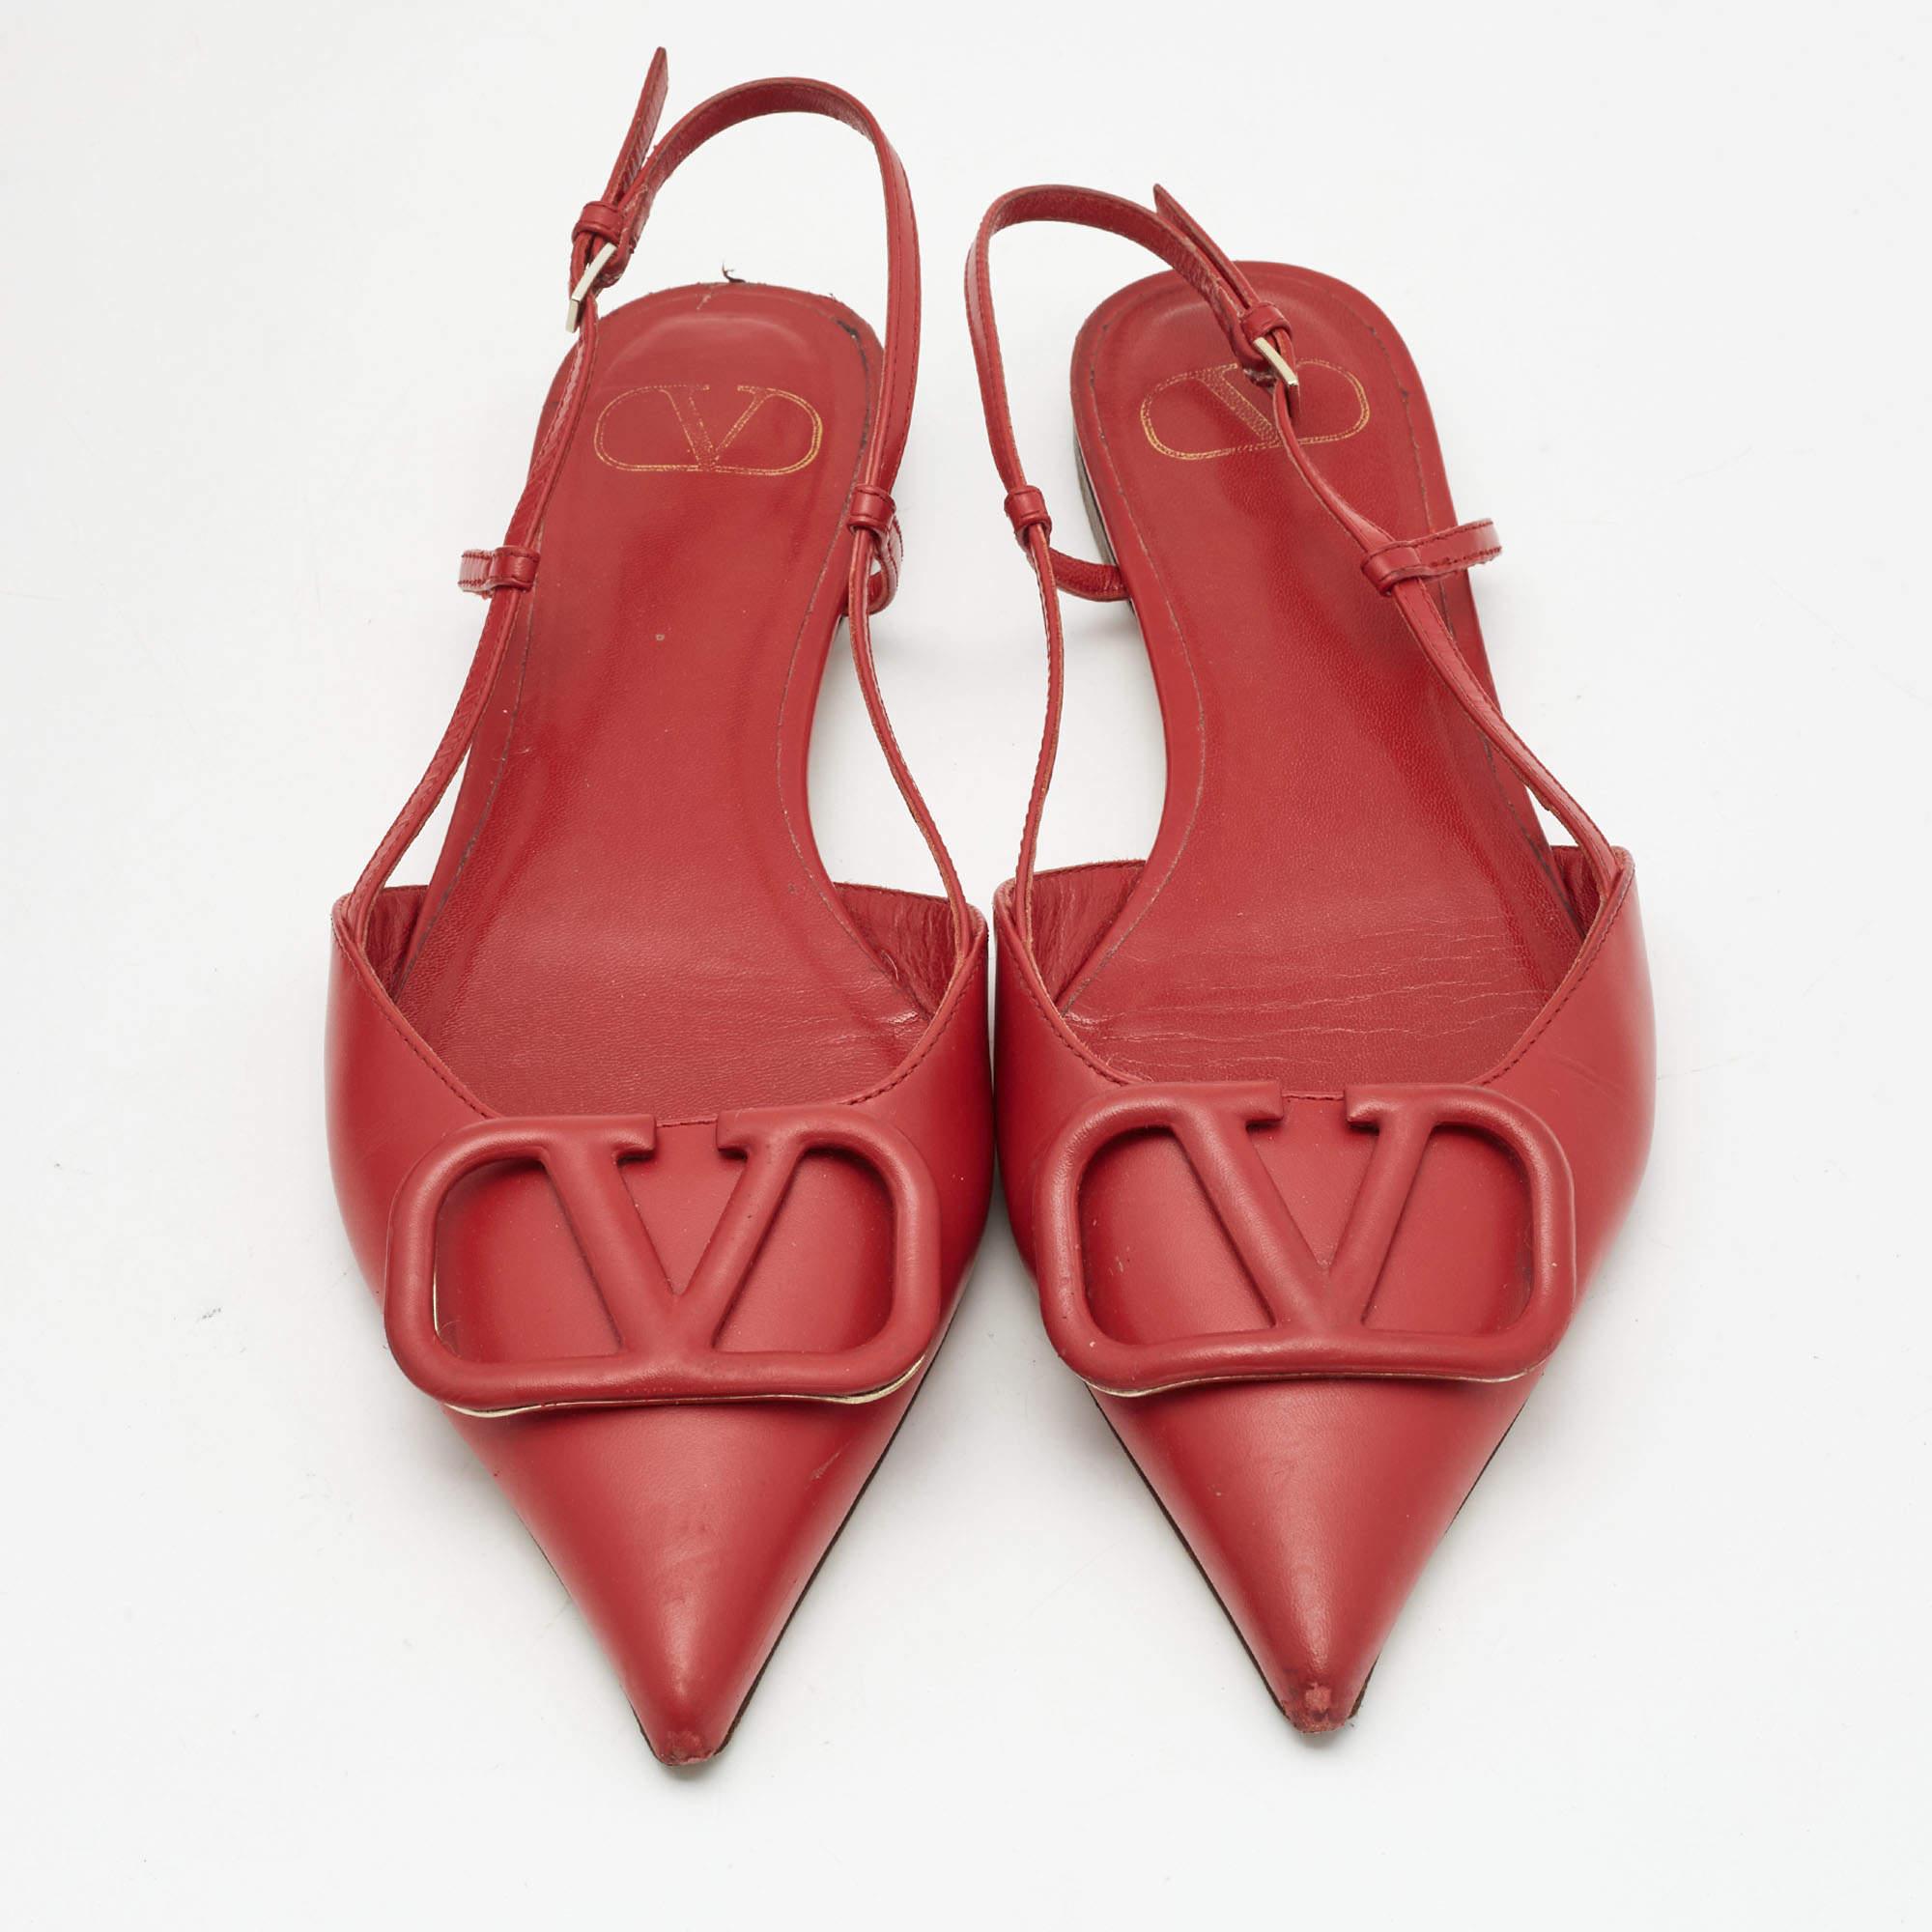 These well-crafted Valentino slingback flats have got you covered for all-day plans. They come in a versatile design, and they look great on the feet.

Includes: Original Dustbag, Original Box

